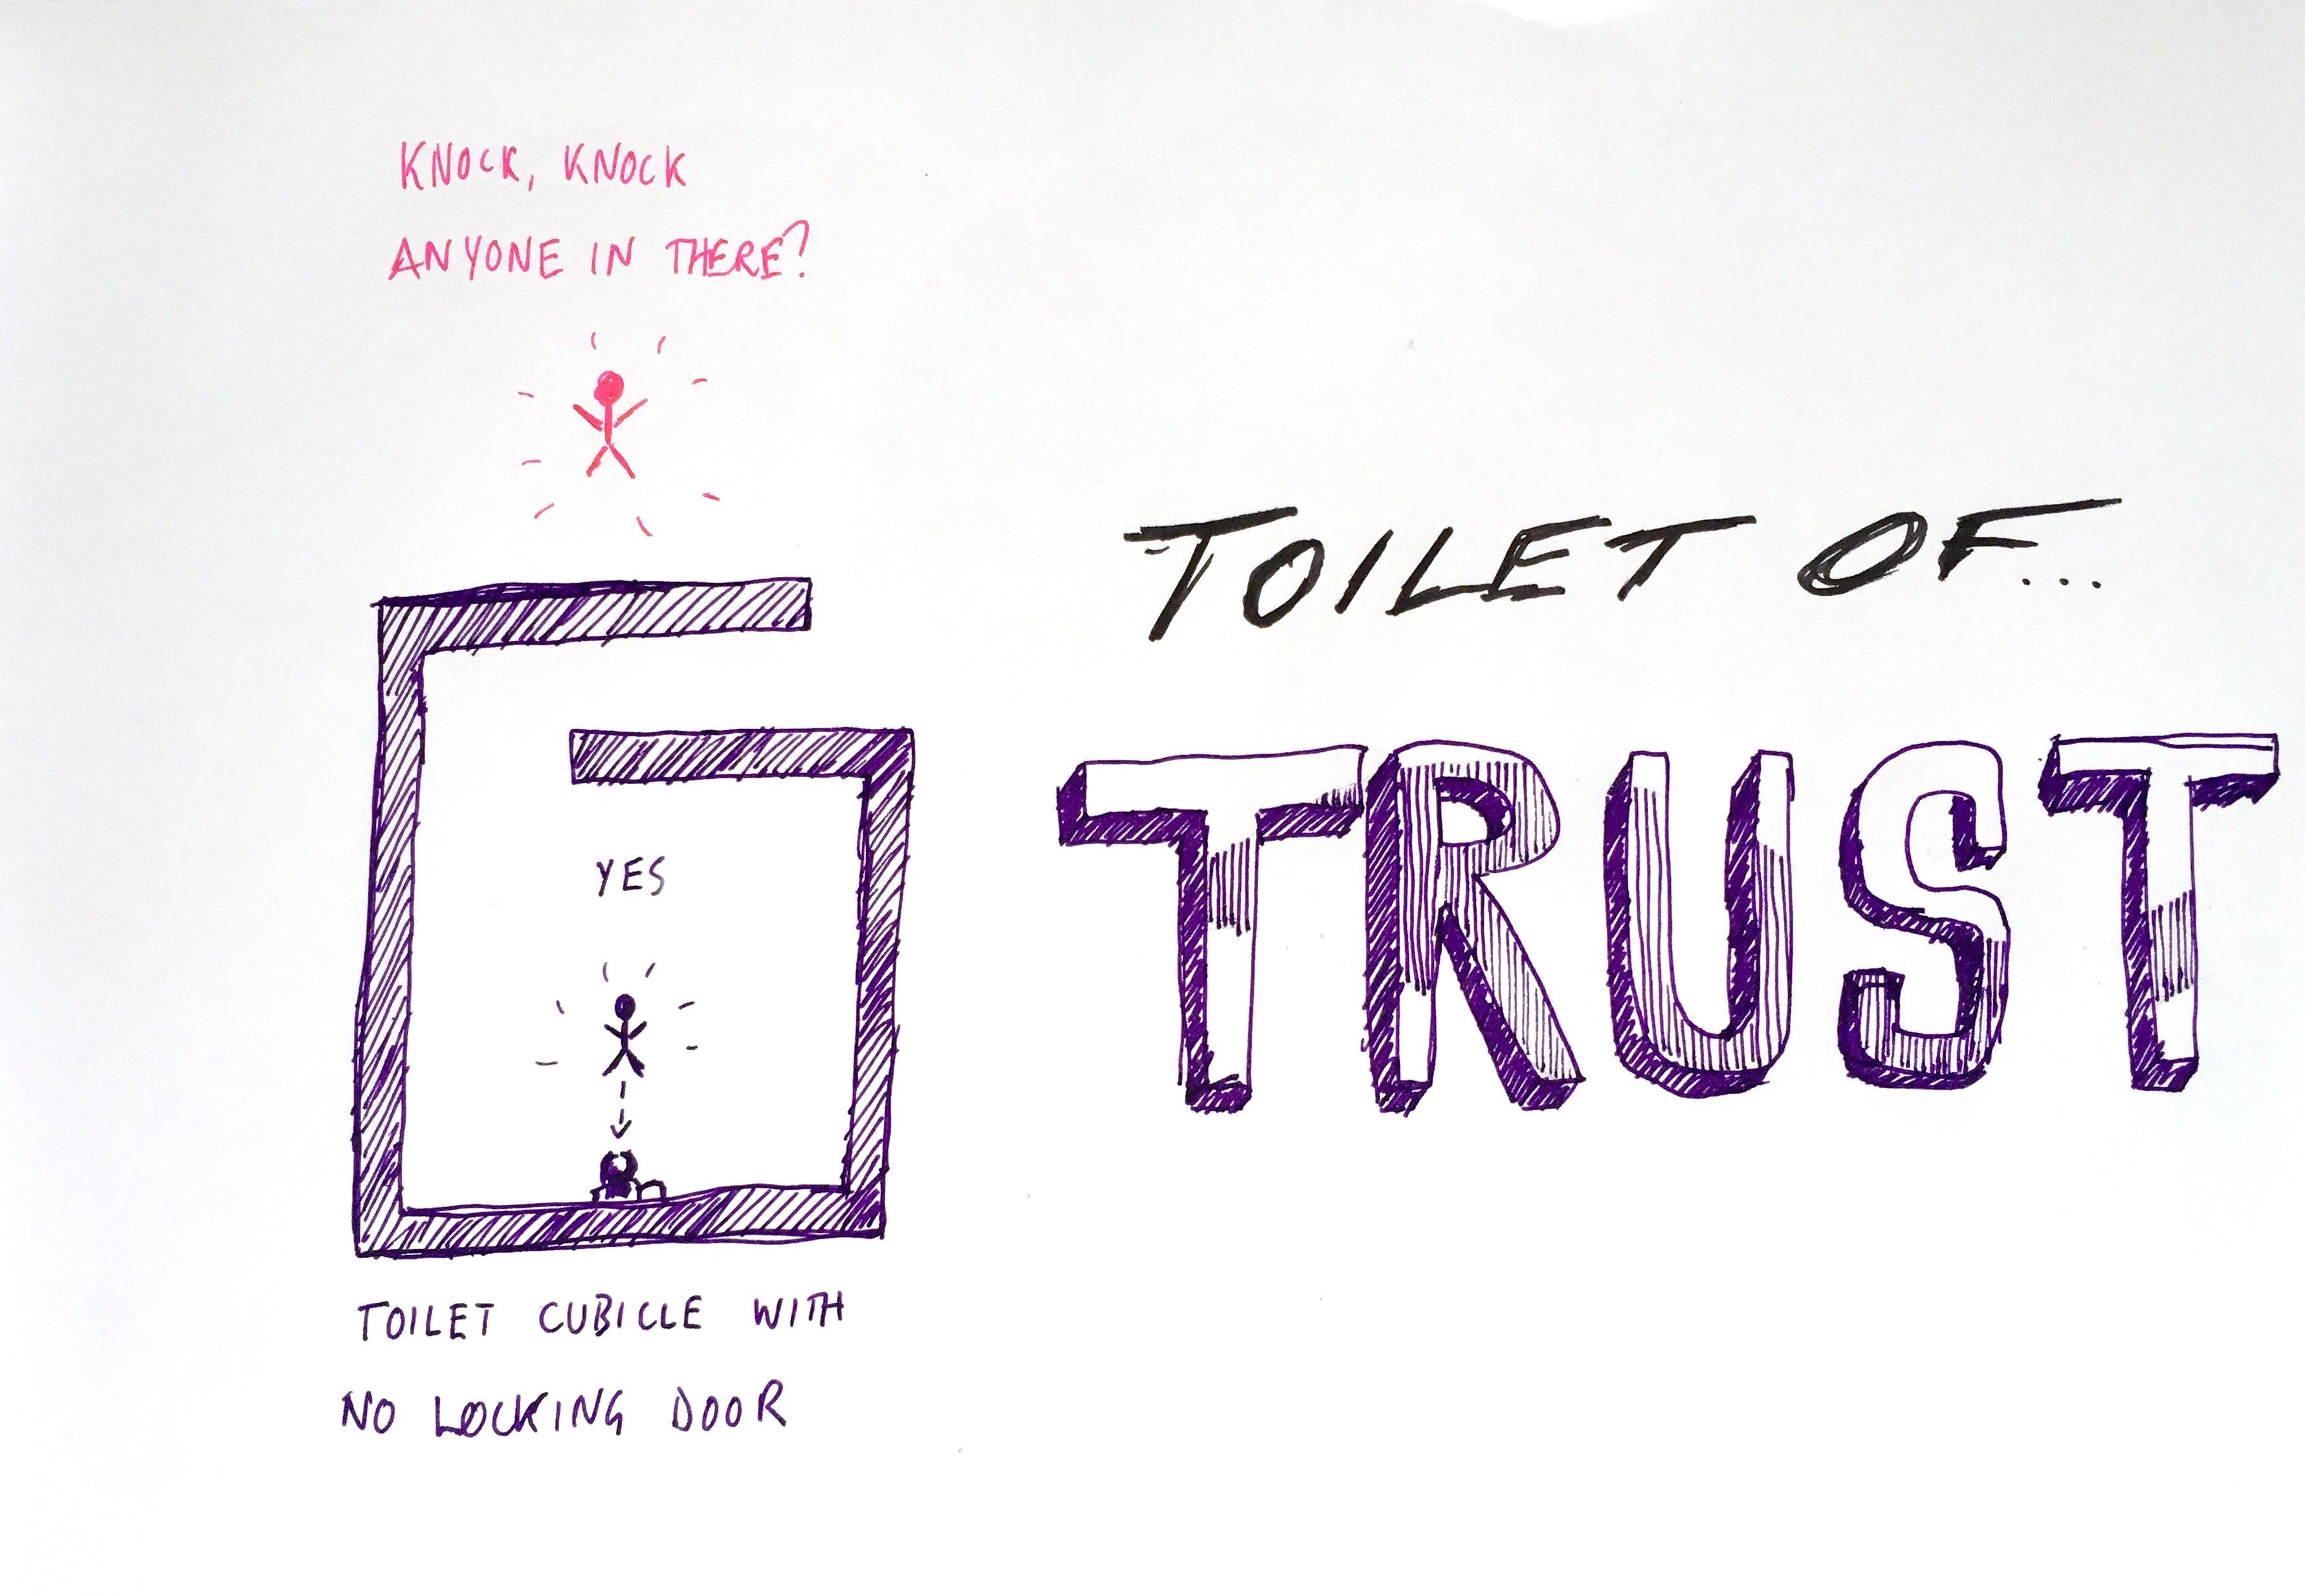 illustration of a toilet cubicle that does not lock. It's based on trust